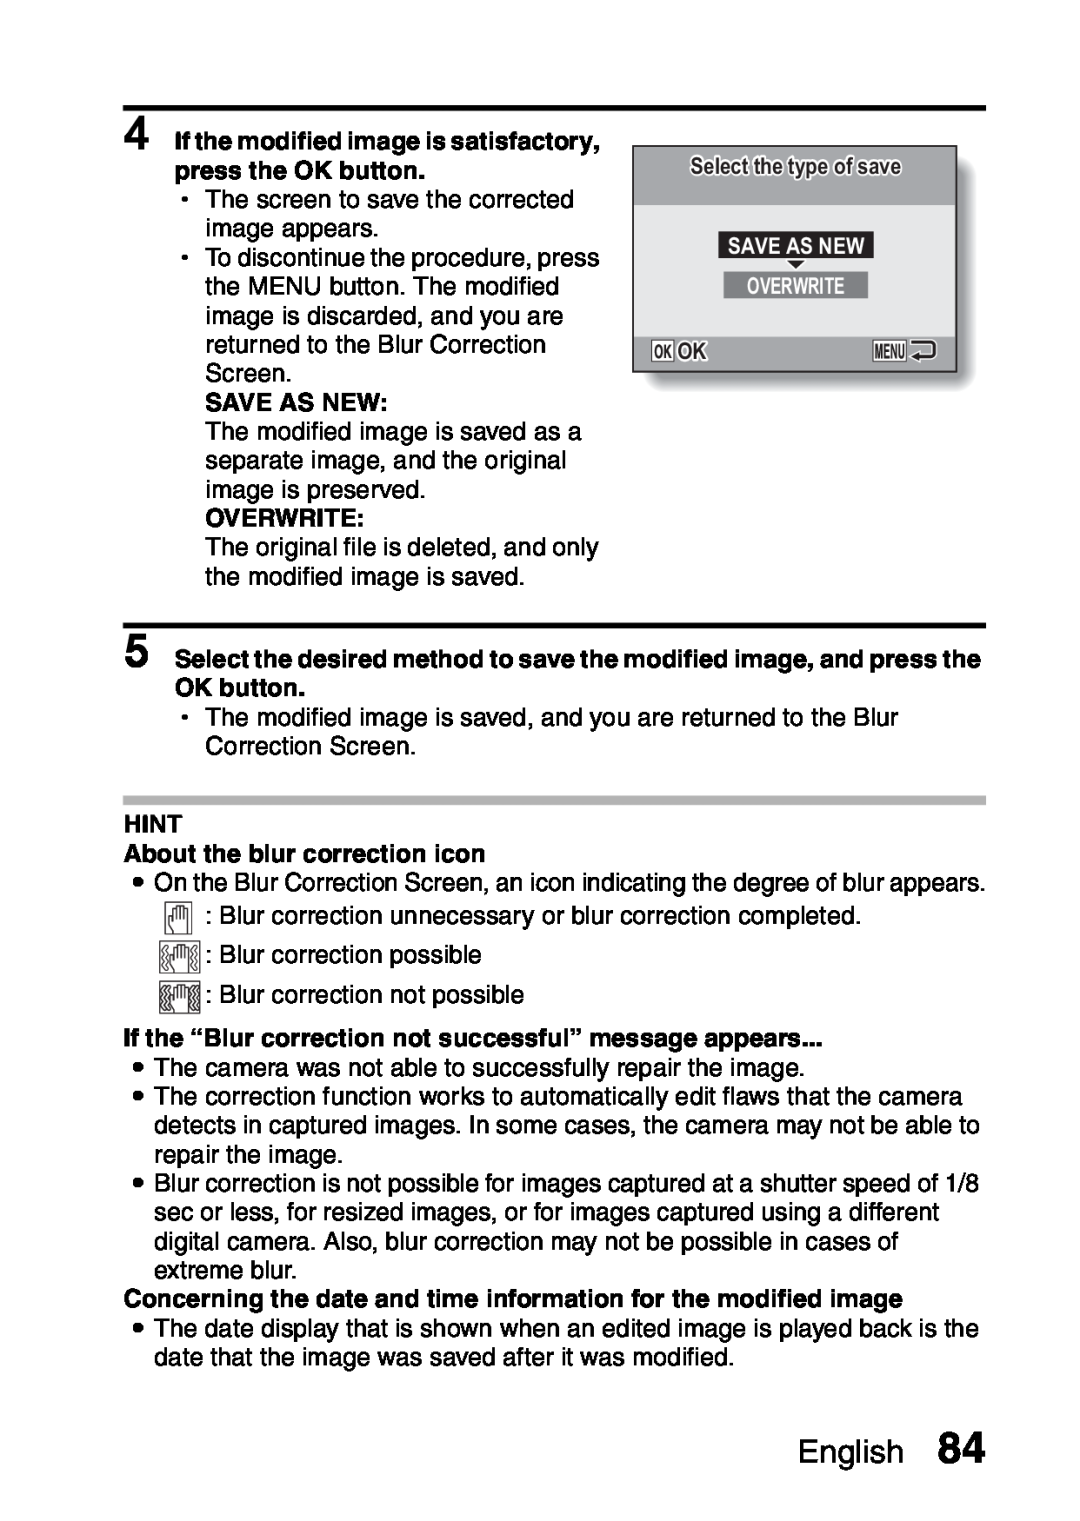 Samsung R50 instruction manual English, If the modified image is satisfactory, press the OK button, Save As New, Overwrite 